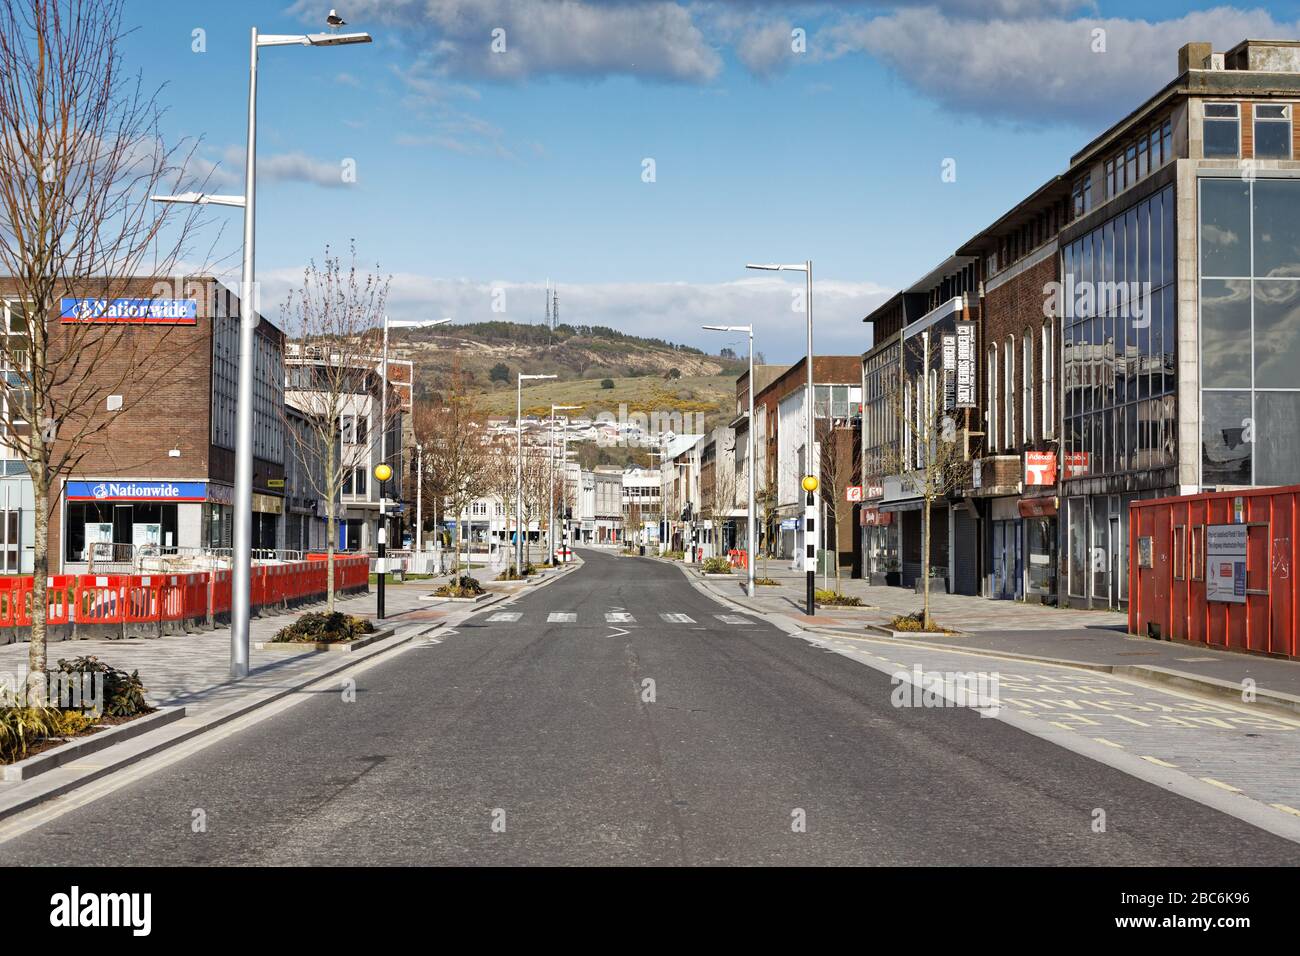 Pictured: The Kingsway, one of the busiest roads in the centre of town, is now deserted in Swansea, Wales, UK. Sunday 29 March 2020 Re: Desertion caus Stock Photo